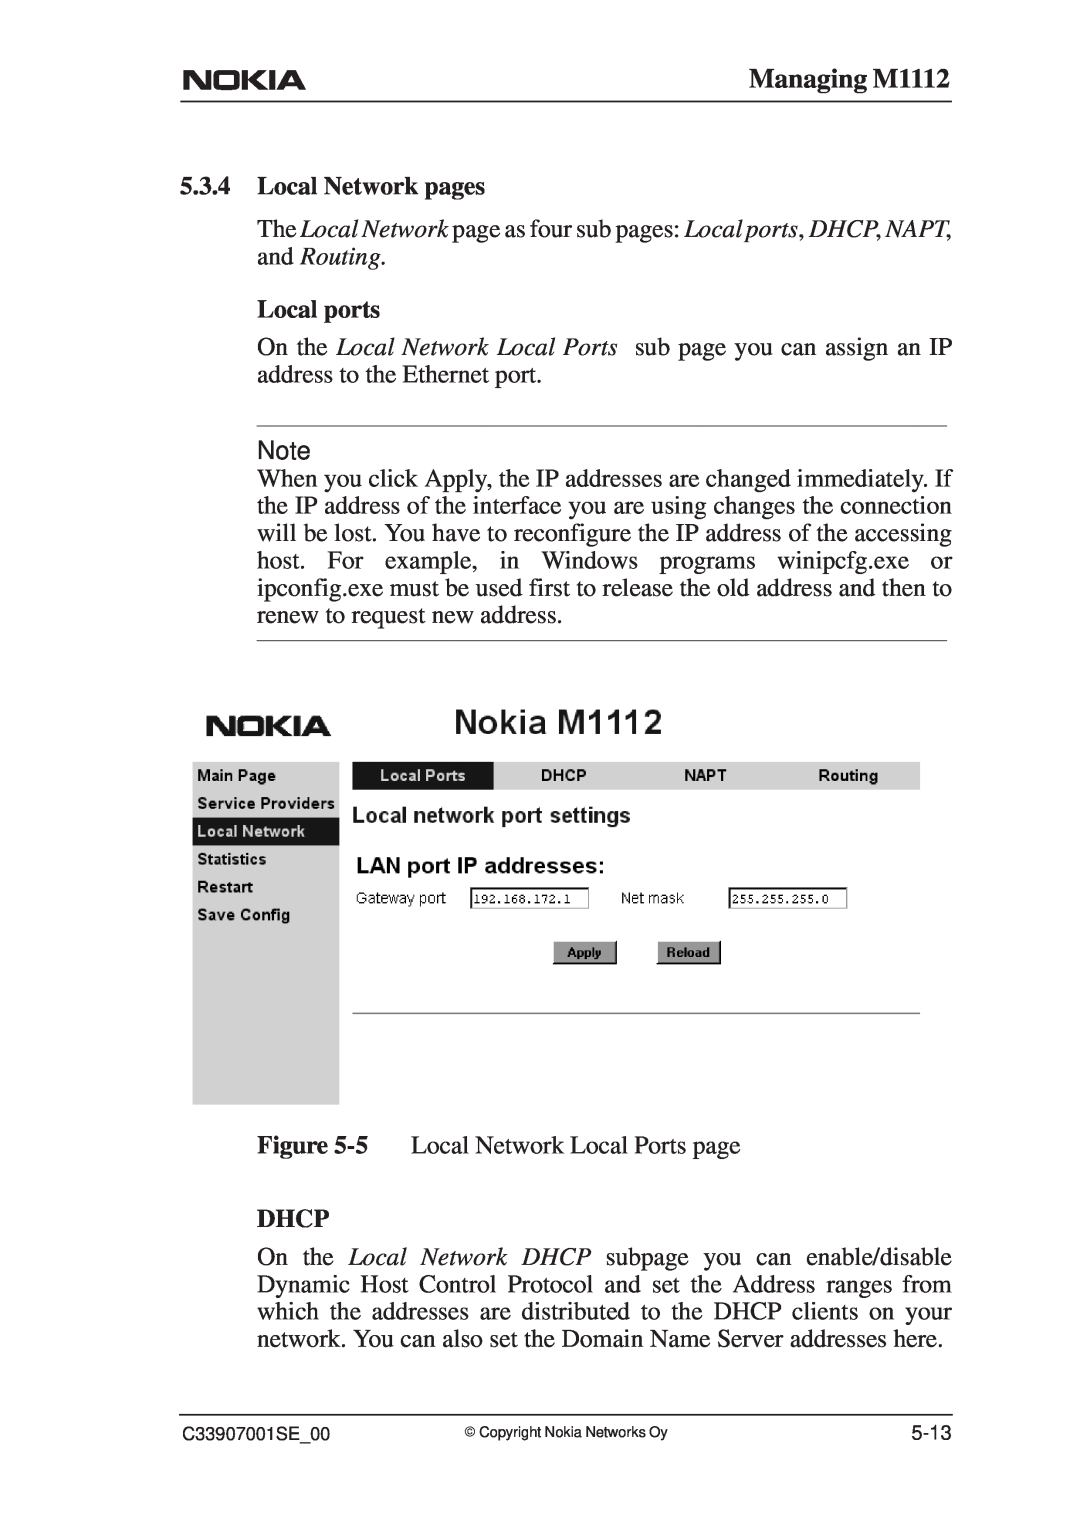 Nokia manual Managing M1112, Local Network pages, Local ports, Dhcp 